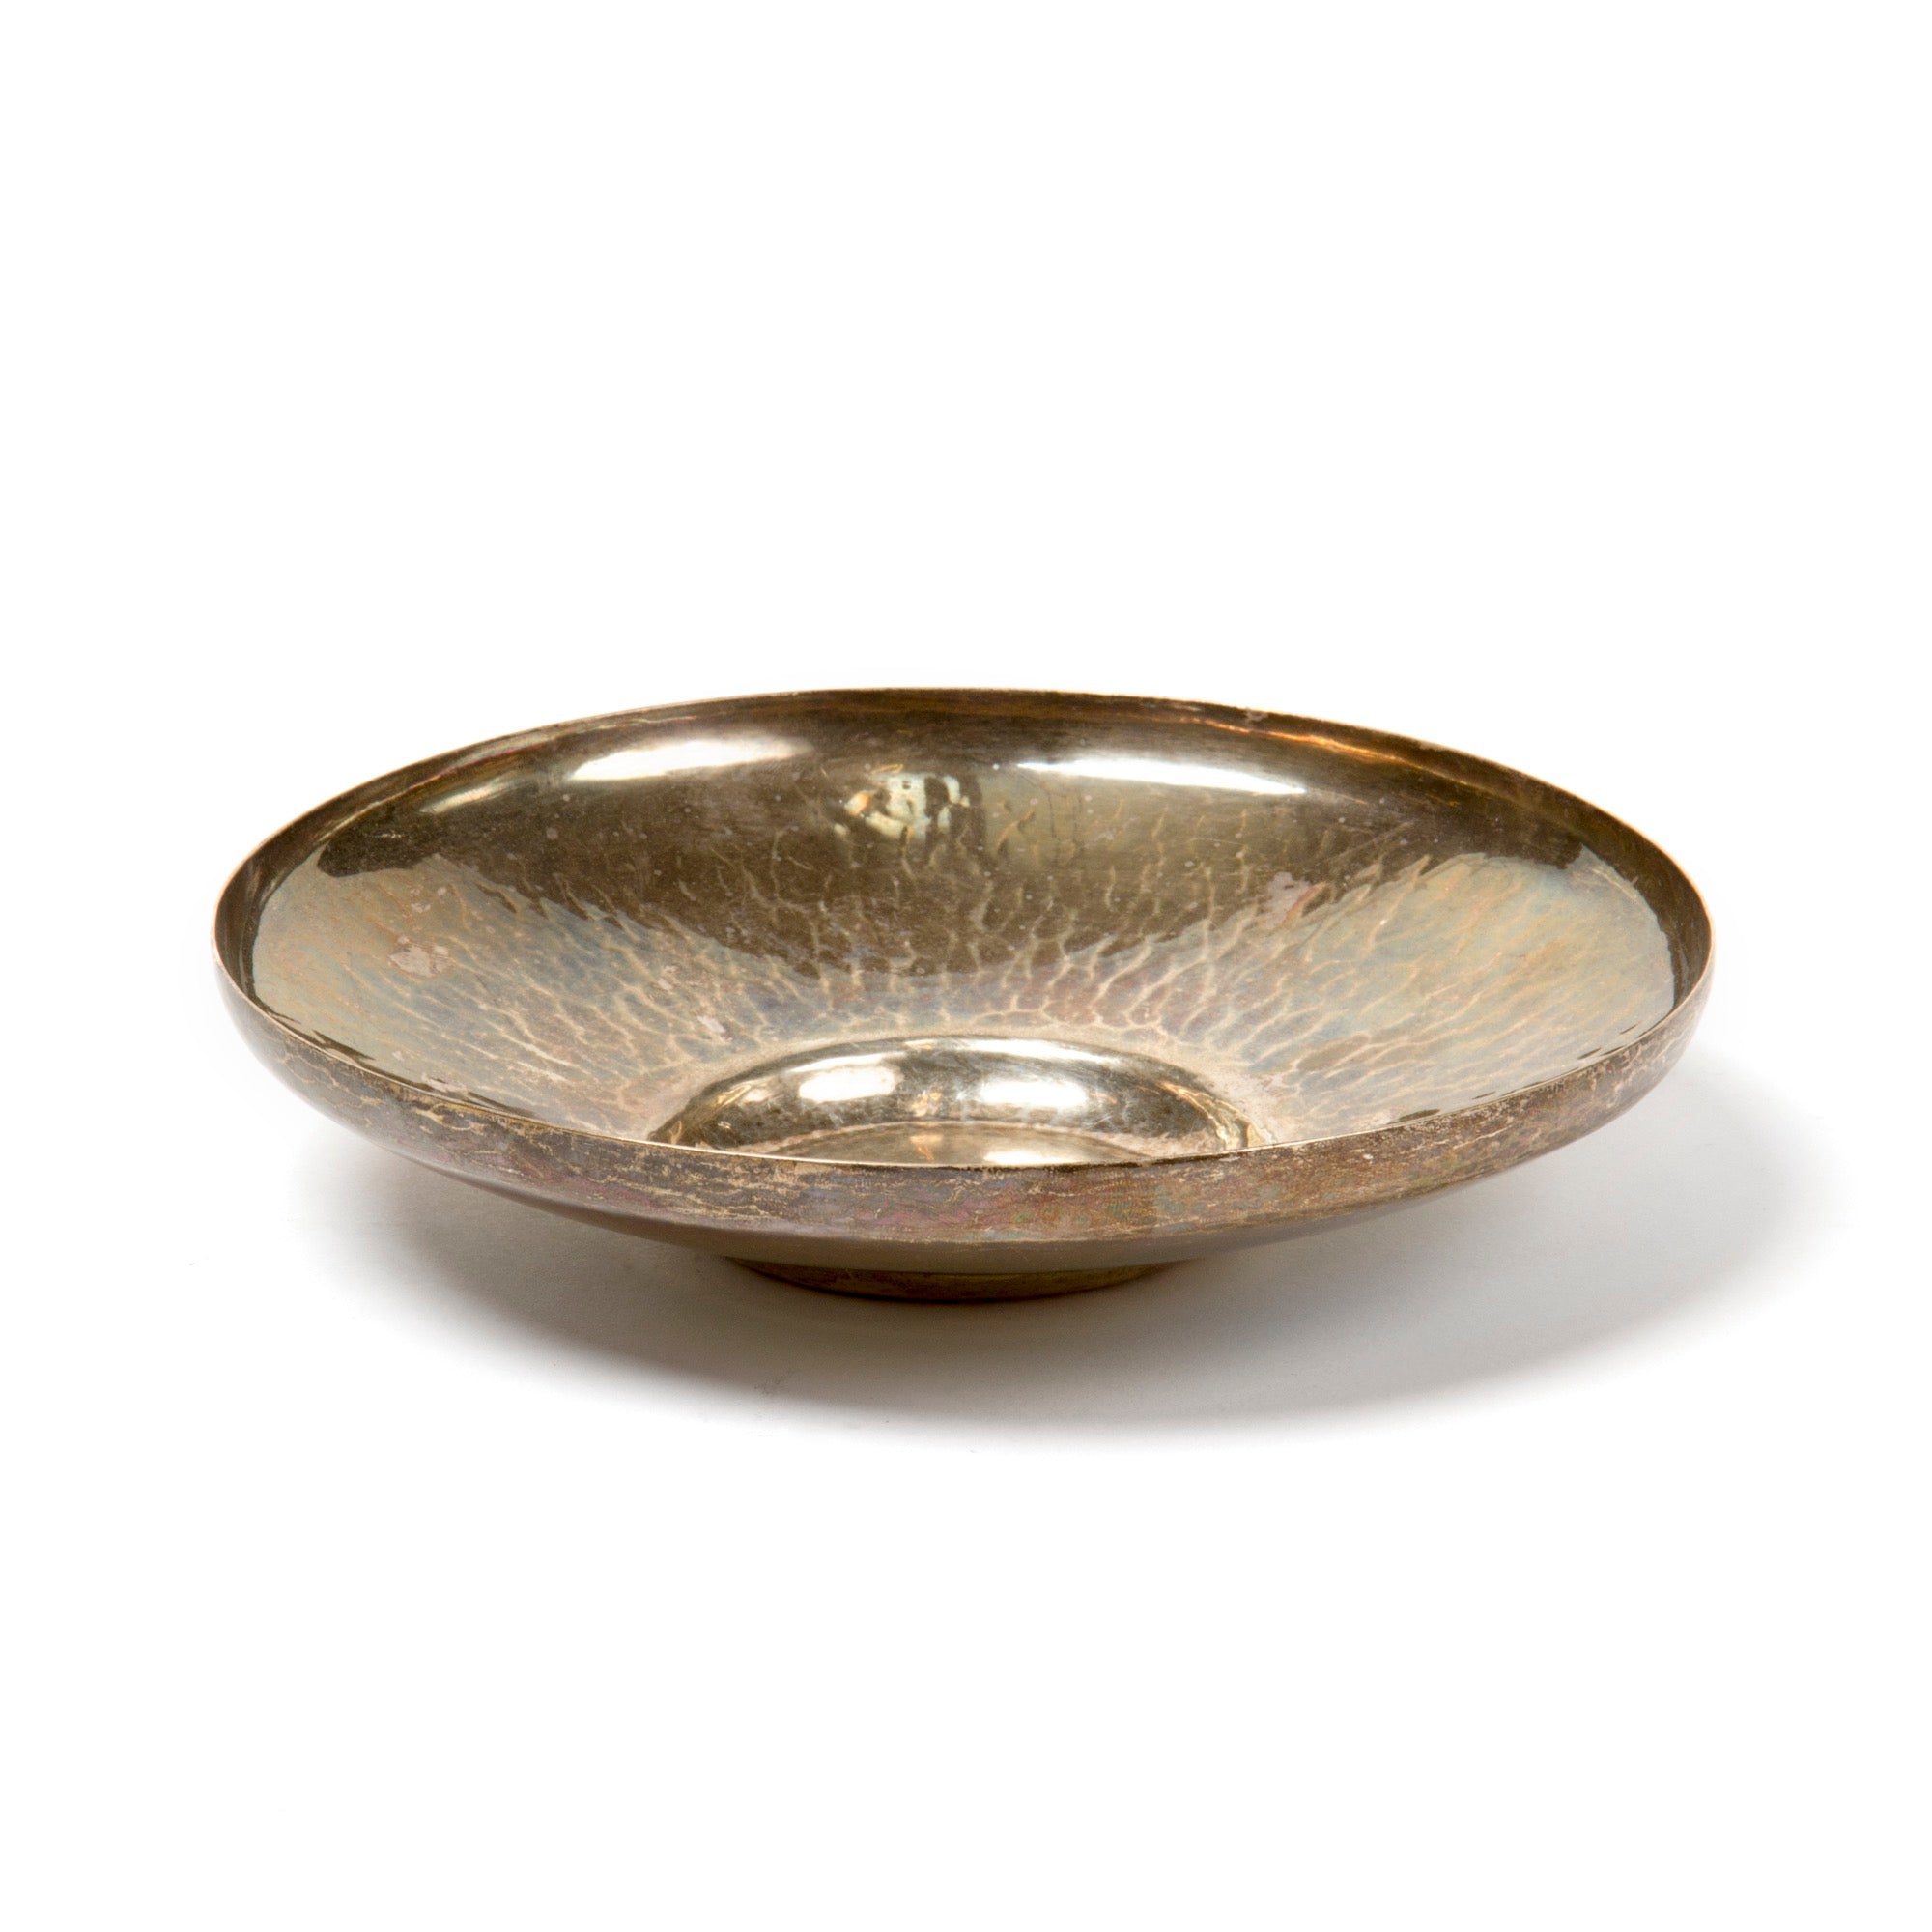 Hammered Silver Bowl by Jan Albers